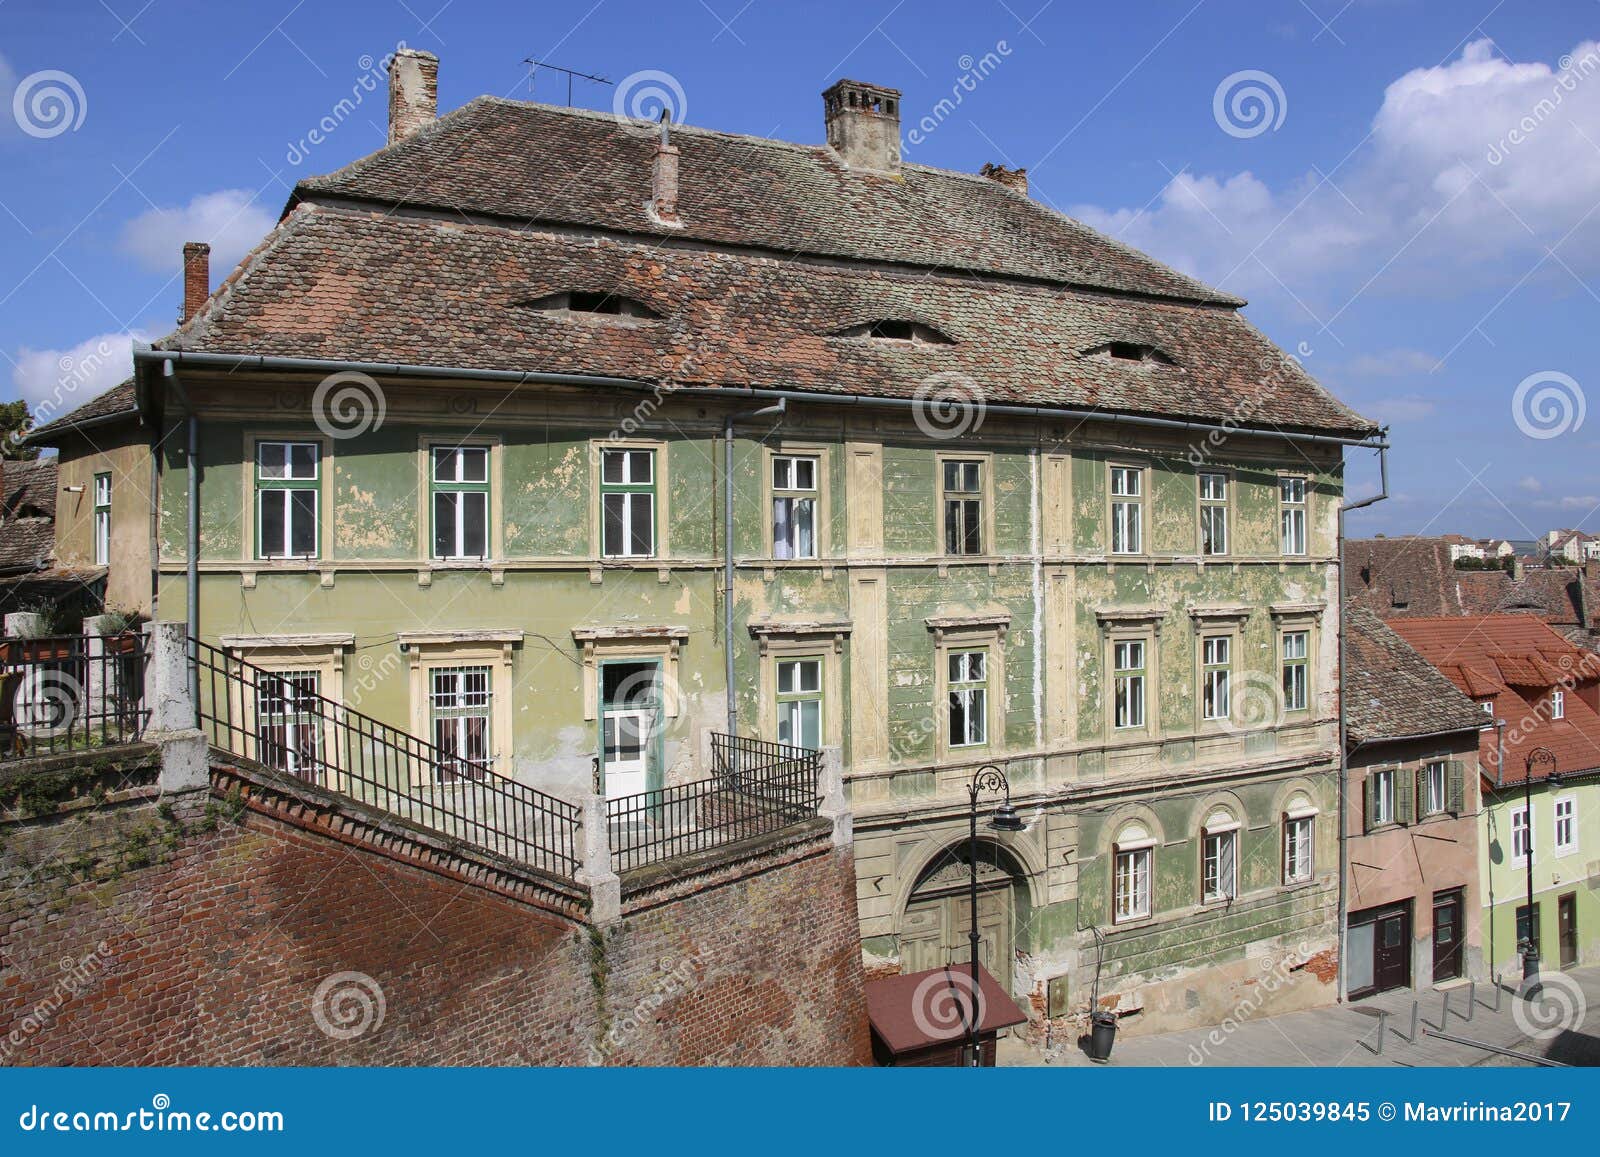 Historical Old Buildings In The Medieval City Sibiu Hermannstad Stock Image Image Of Architectural Center 125039845